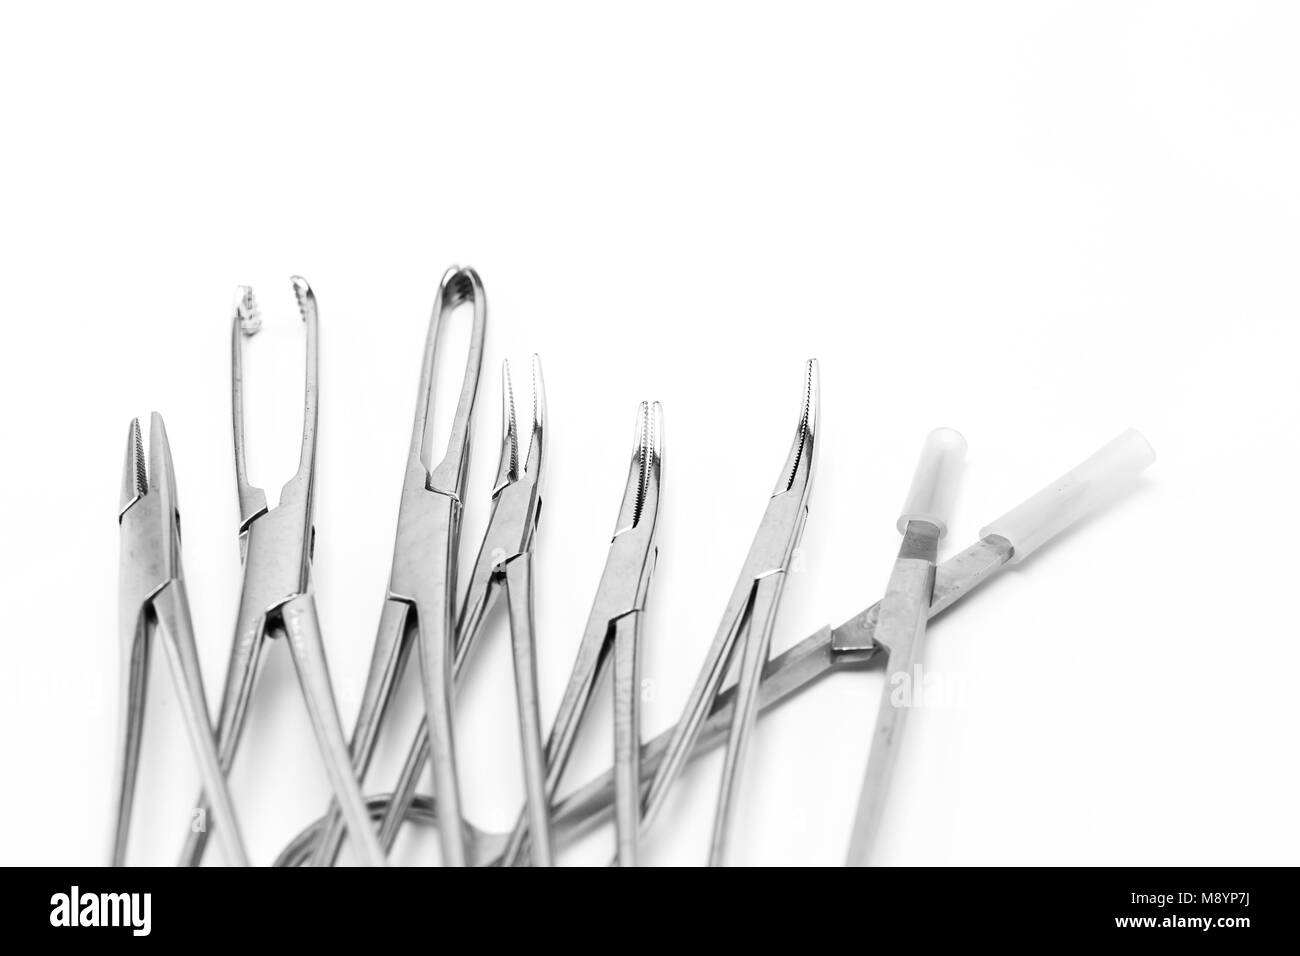 Medical surgical pliers instrument isolated on white background Stock Photo